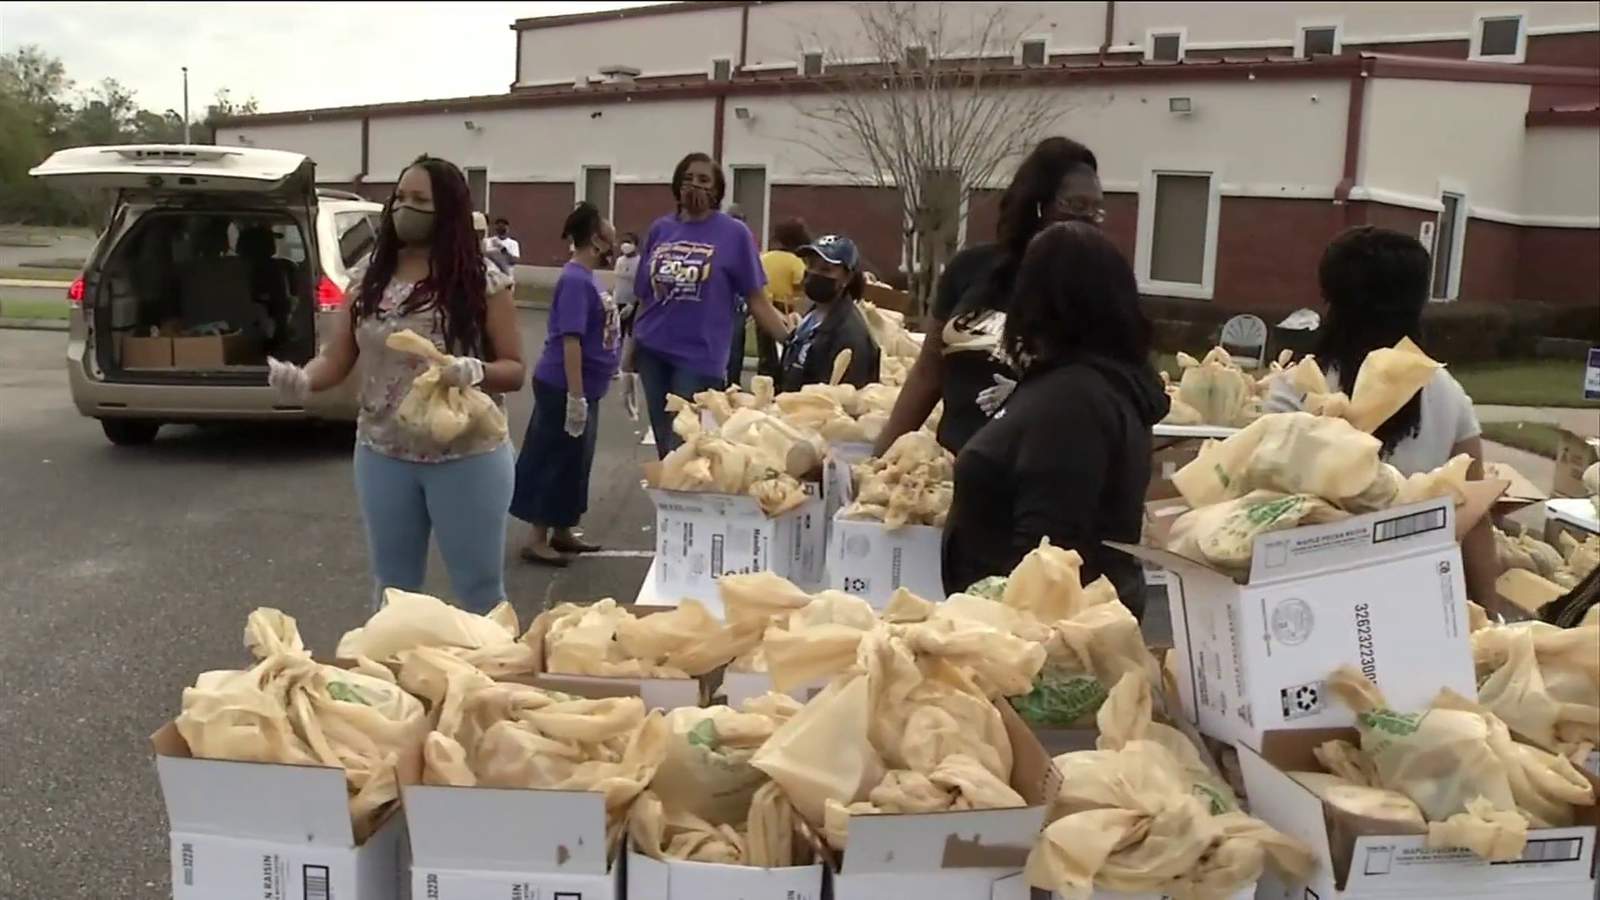 Farm Share serves over 500 families in need at Northside food giveaway